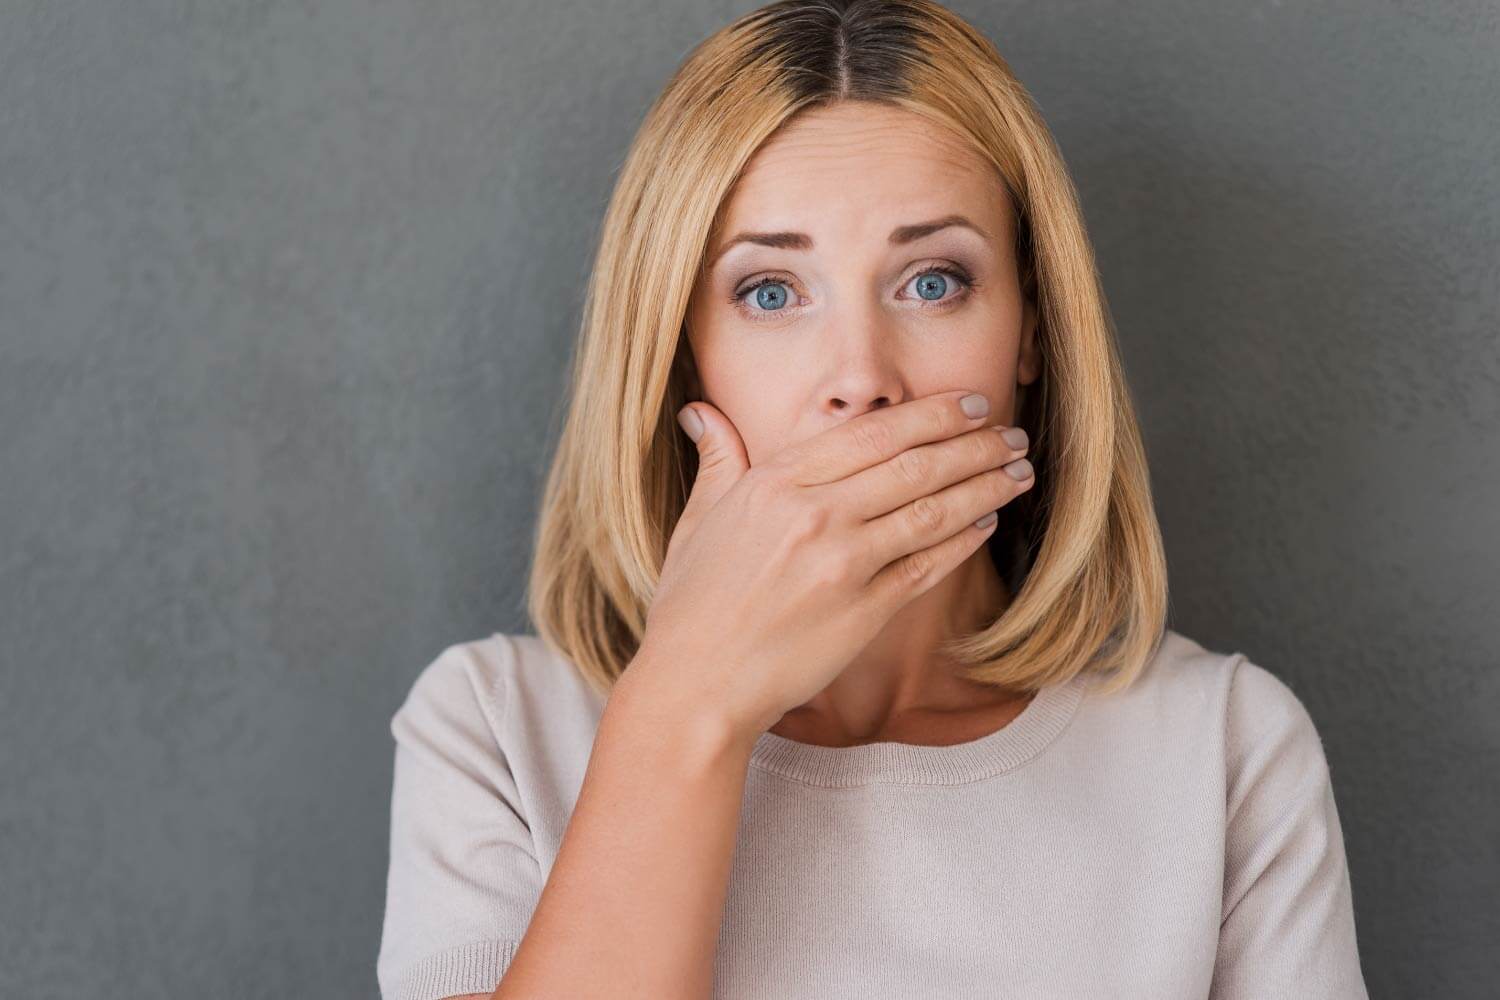 Blonde woman covers her mouth in embarrassment due to gum disease causing receding gums